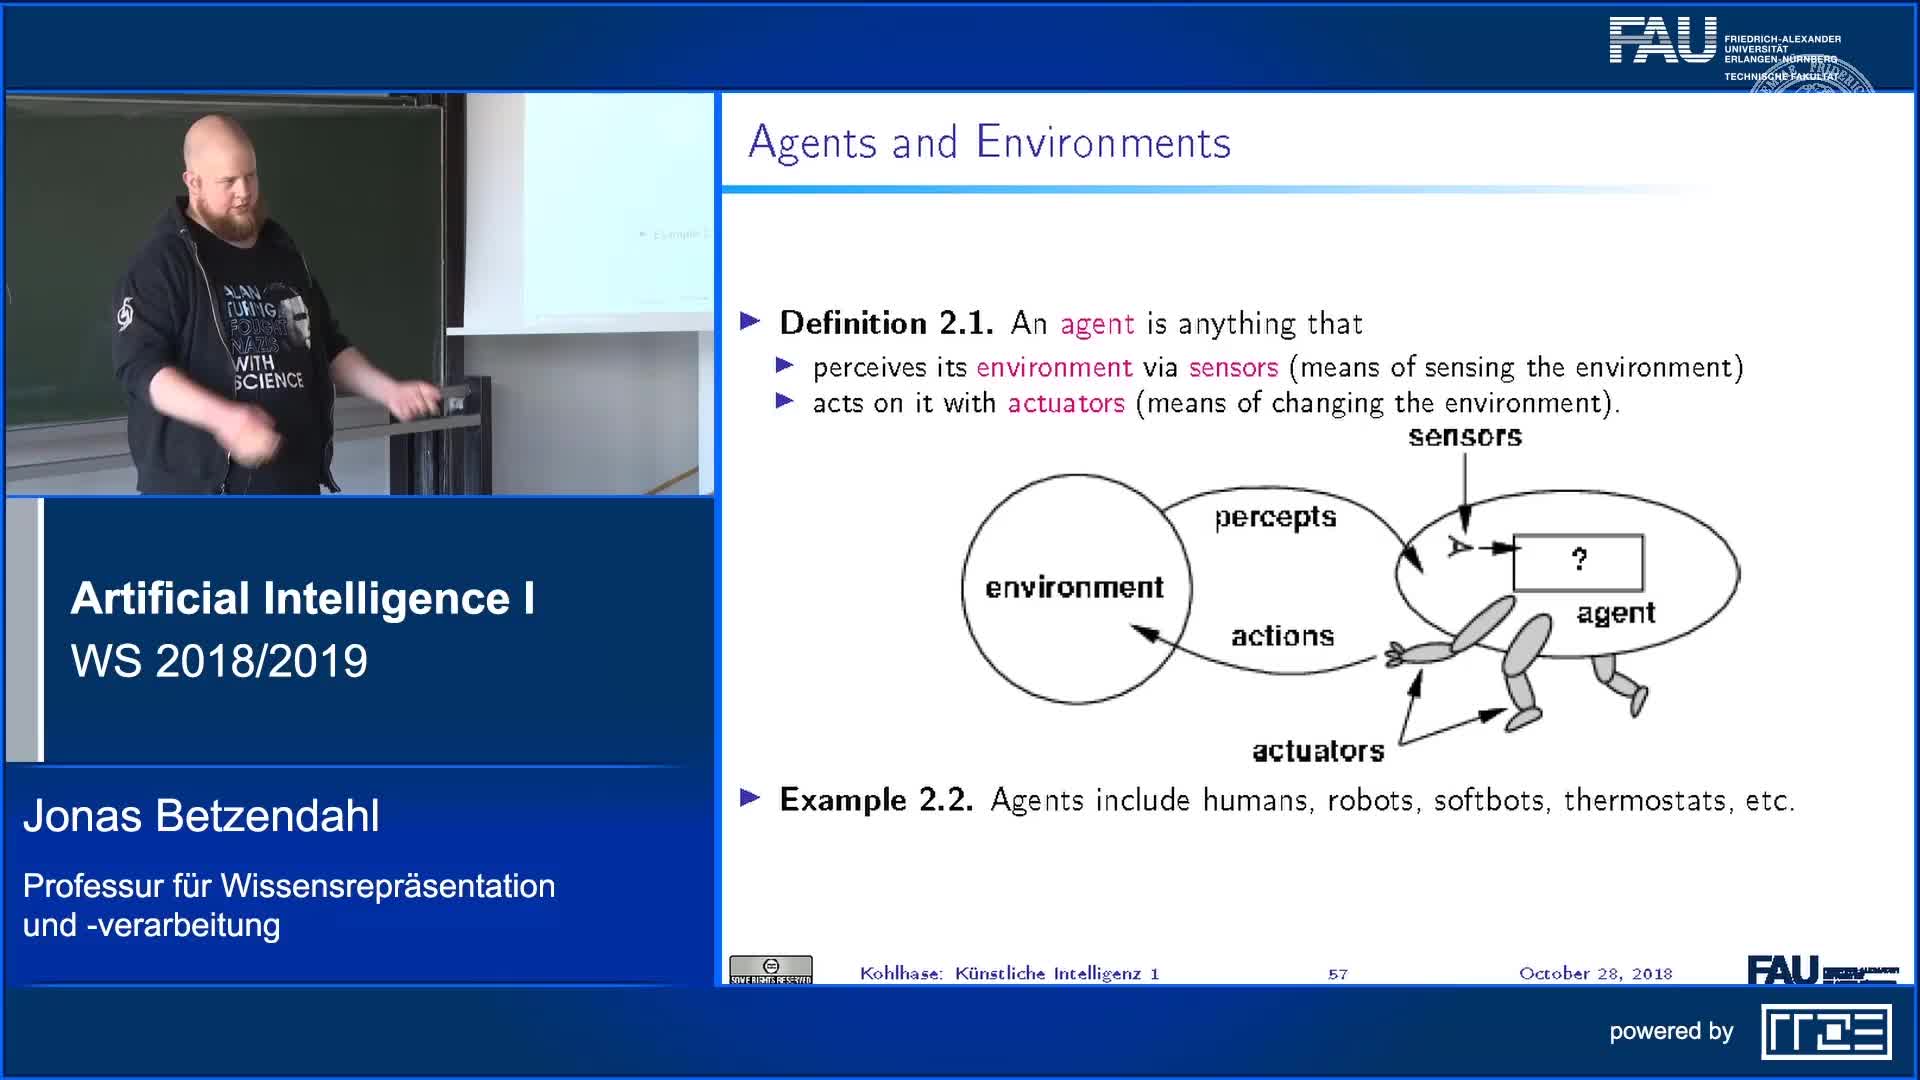 Agents and Environments as a Framework for AI preview image